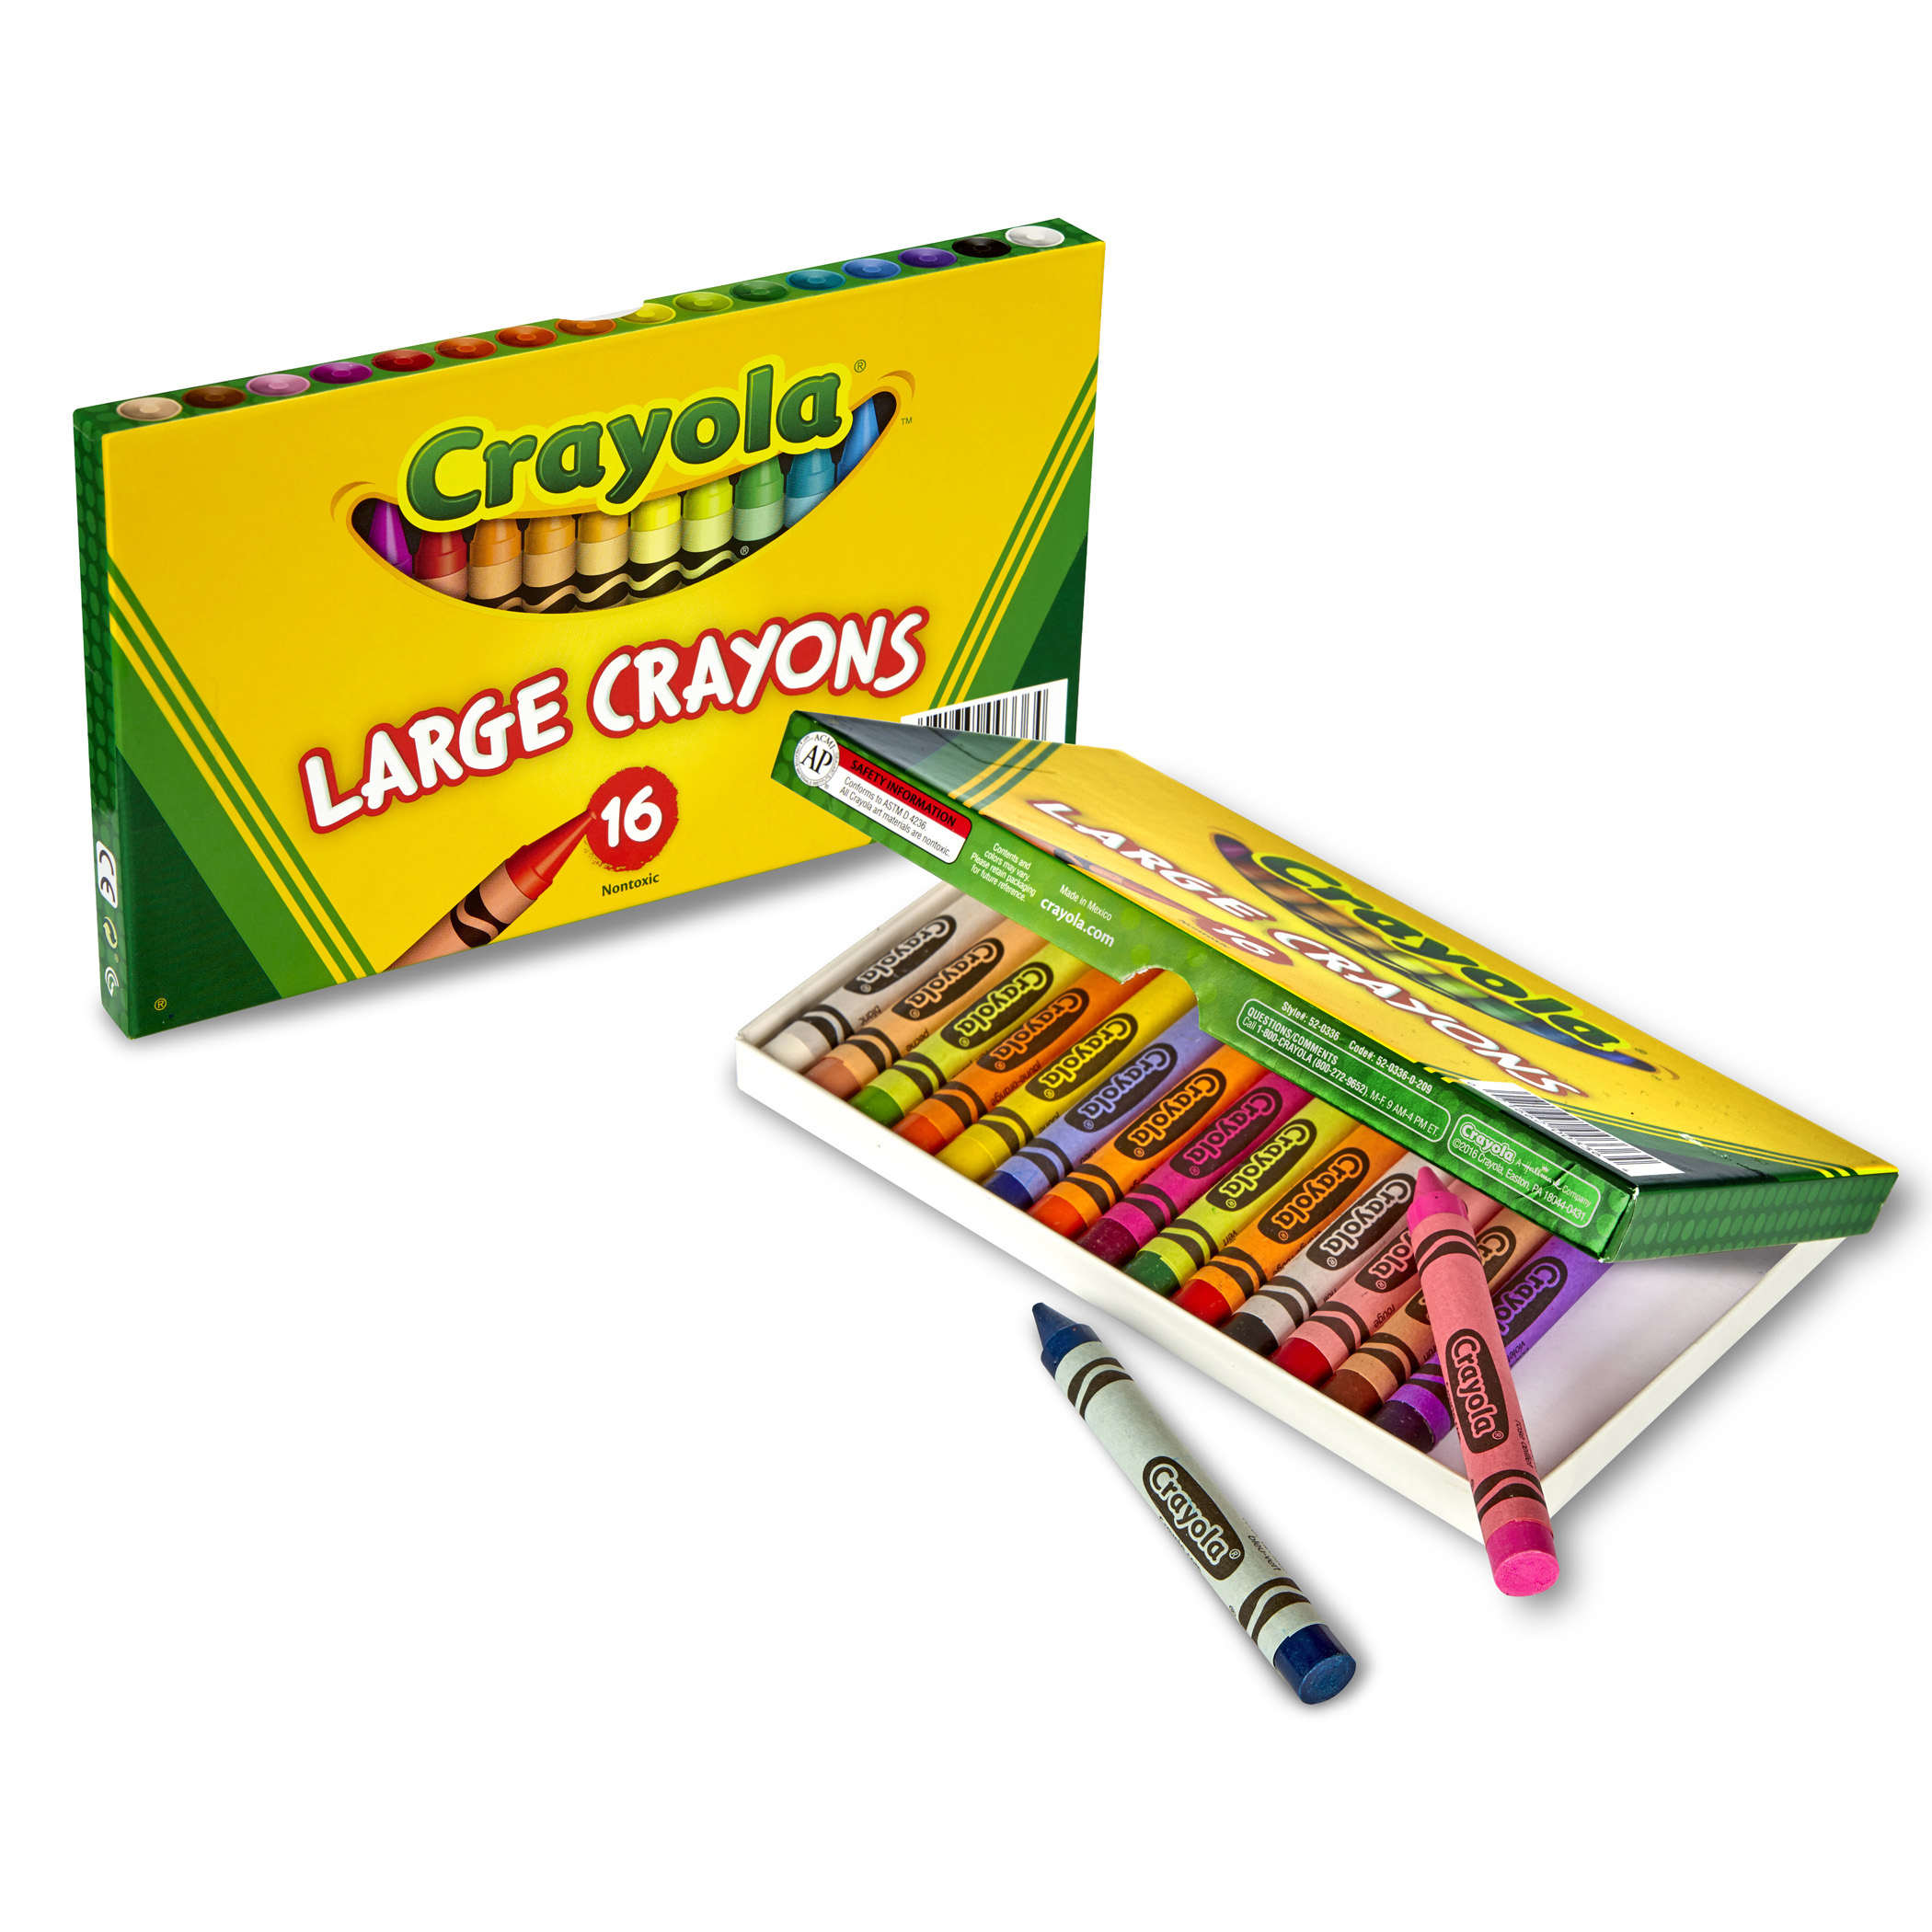 The Teachers' Lounge®  Large Crayons, Classic Colors, 16 Count